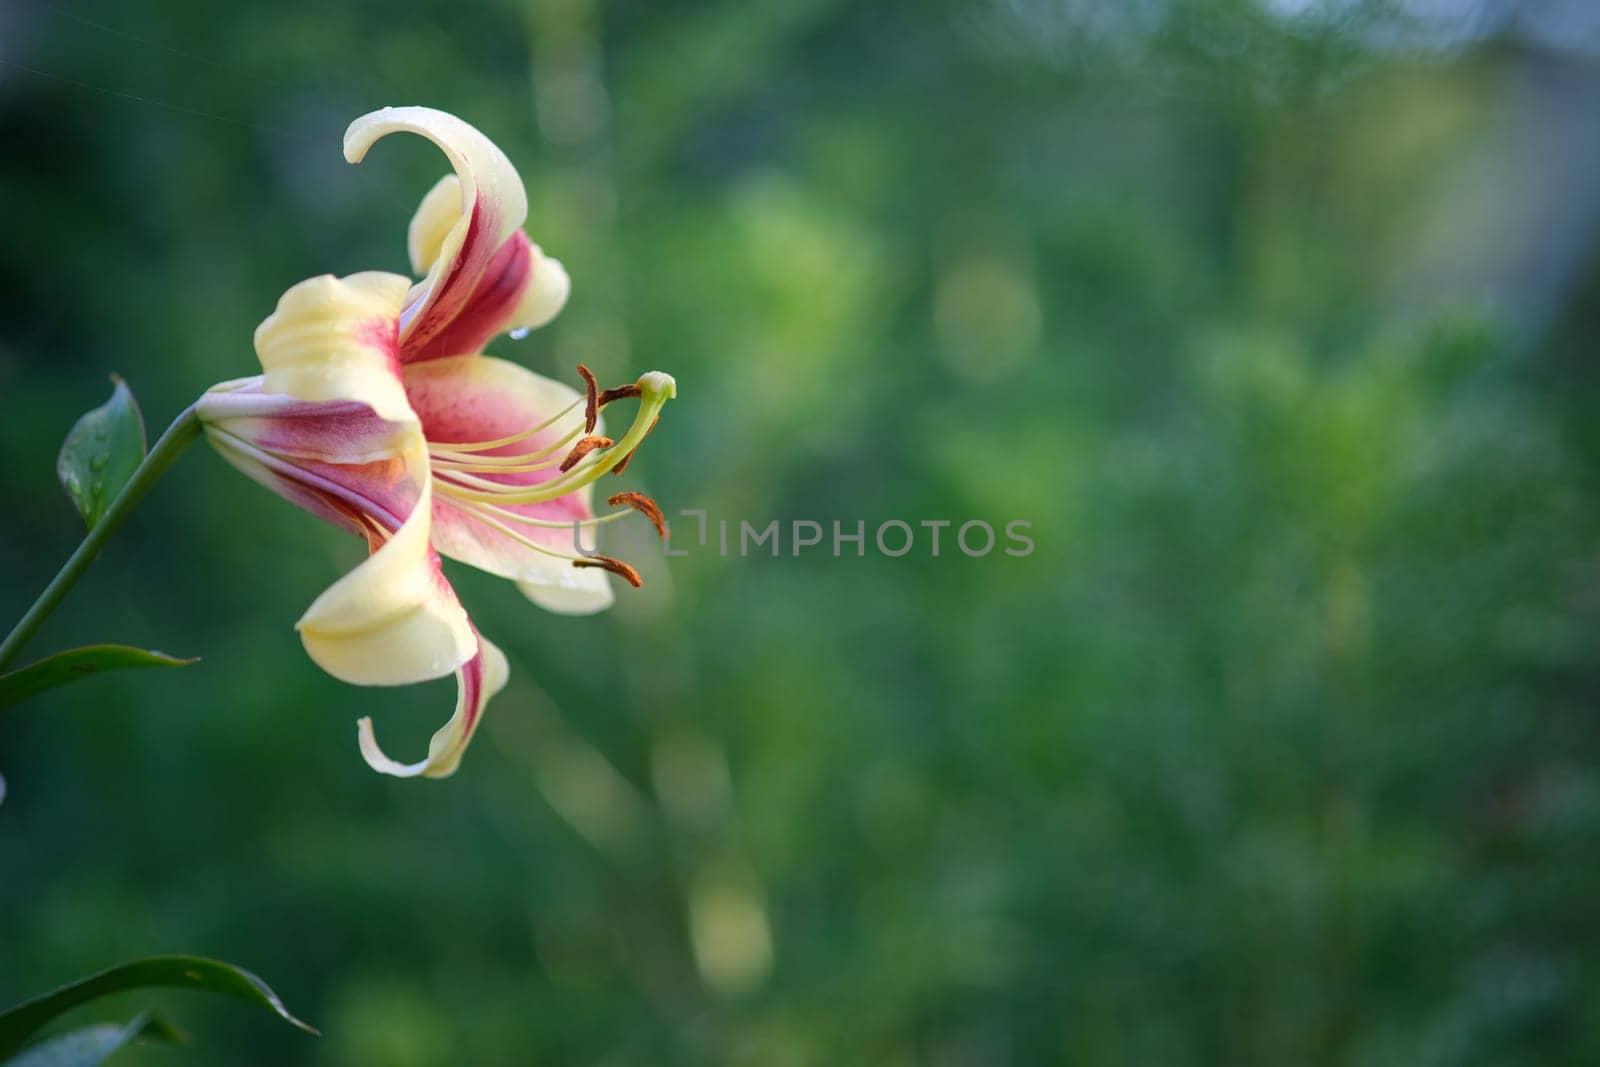 Lily close-up. Lonely flower on a blurred background. bell shaped flower